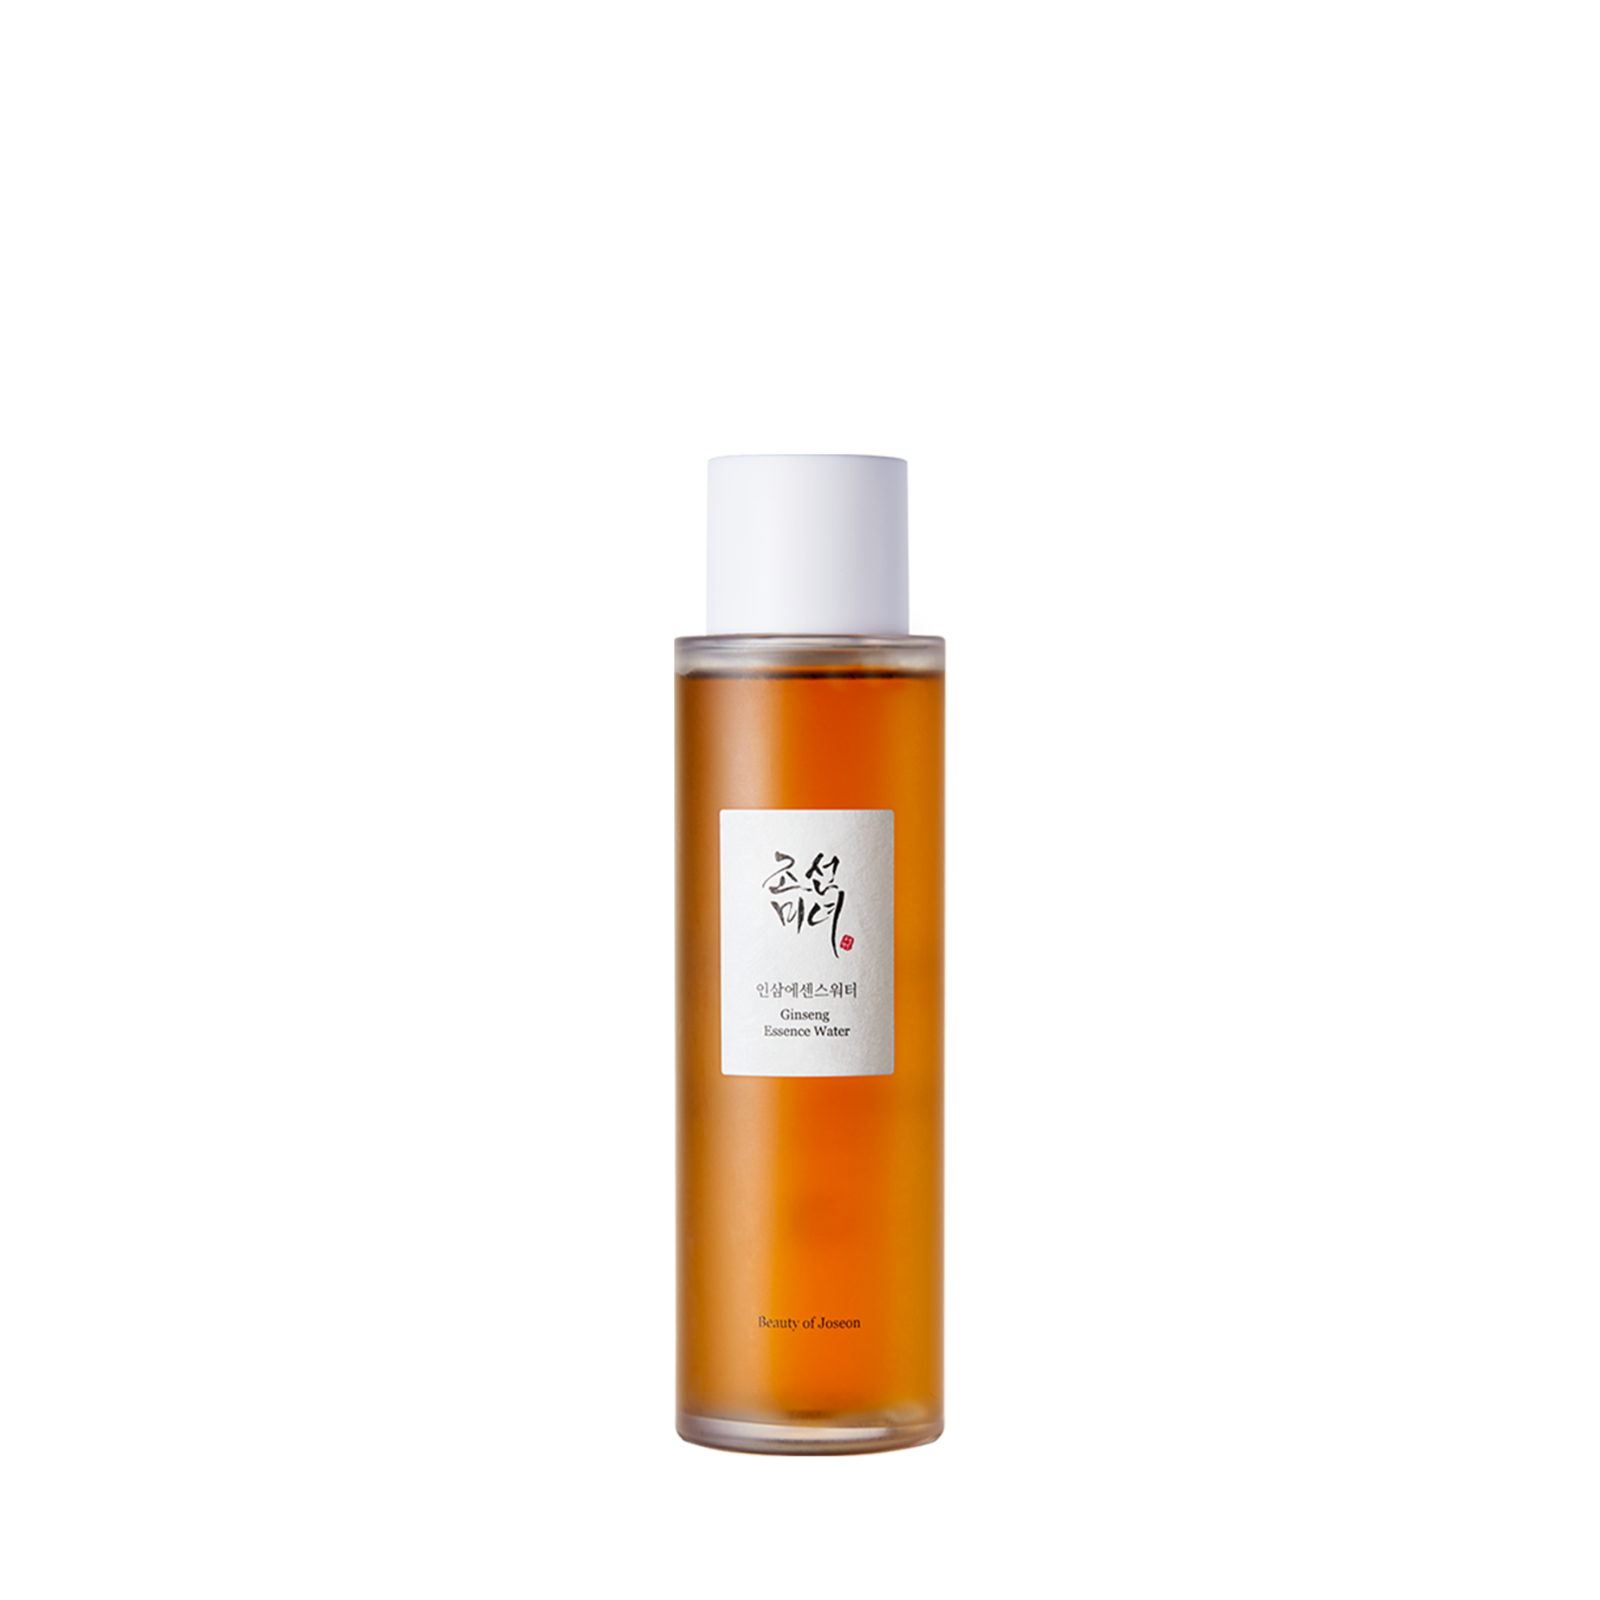 Facial toner with ginseng extract by Beauty of Joseon (Beauty of Joseon Ginseng Essence Water)